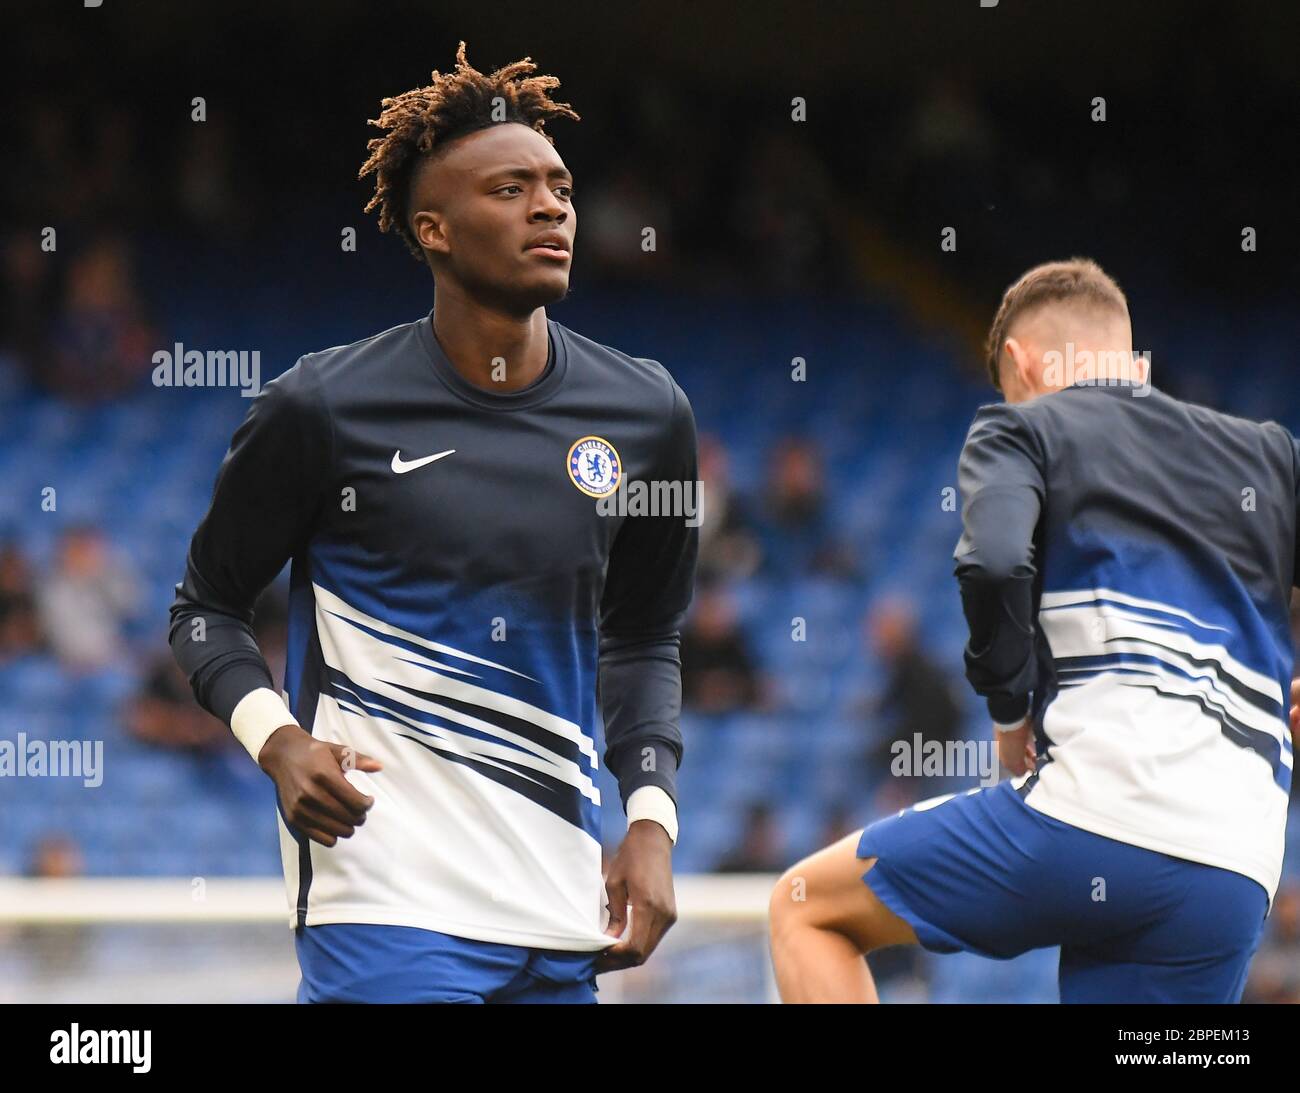 LONDON, ENGLAND - SEPTEMBER 22, 2019: Tammy Abraham of Chelsea pictured ahead of the 2019/20 Premier League game between Chelsea FC and Liverpool FC at Stamford Bridge. Stock Photo